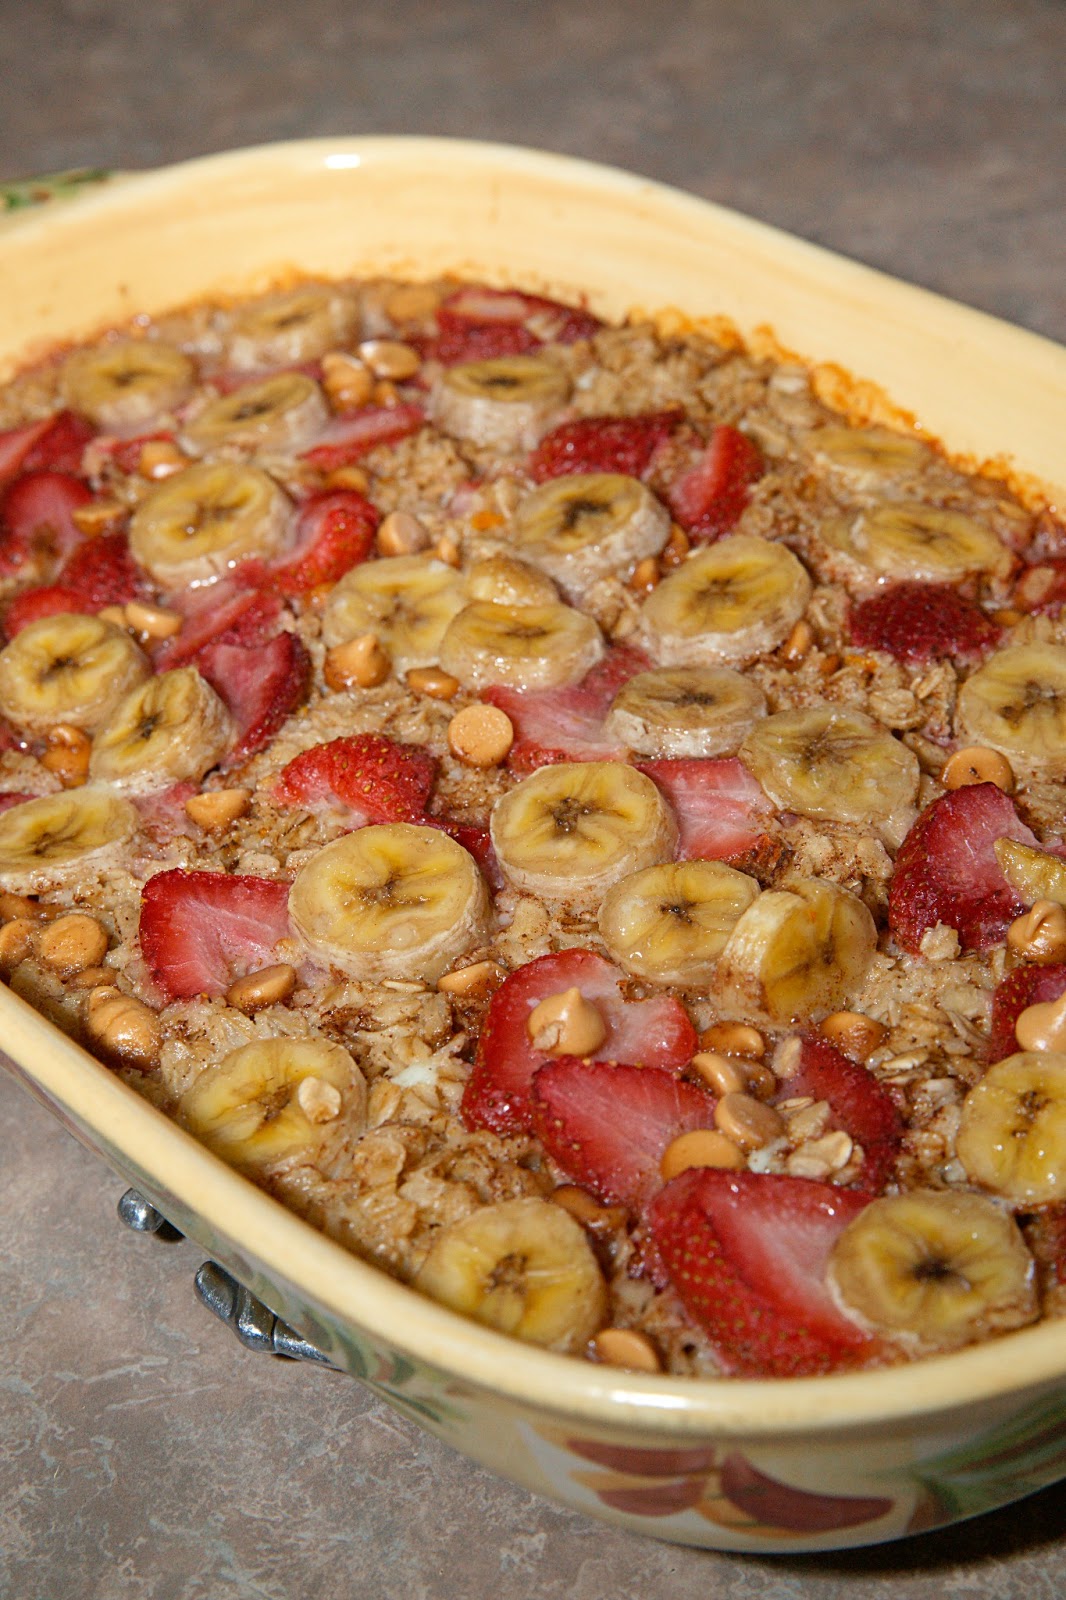 Savory Sweet and Satisfying: Strawberry Peanut Butter Banana Baked Oatmeal